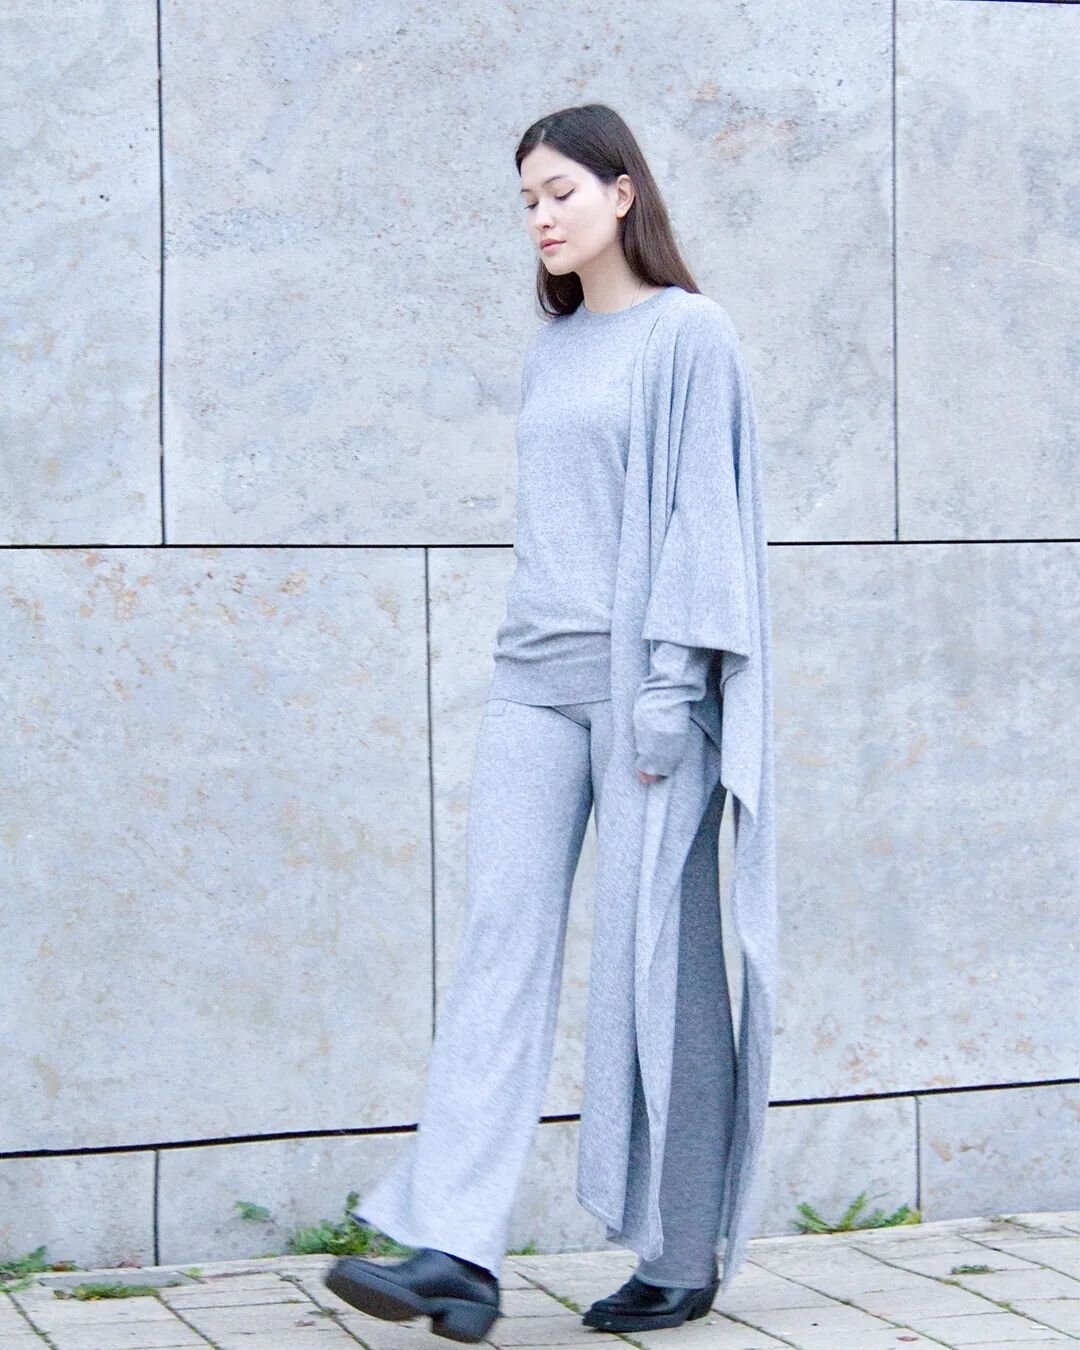 Cozy soft melange colour of new wool. The 2ply knitted A- line wide leg pants are made from Mongolian soft  lamswool &amp; perfect for now days. @hoberlin_ #madeinmongolia
Designed and photographed by @hongra.zul #berlin
Model @nandinnat